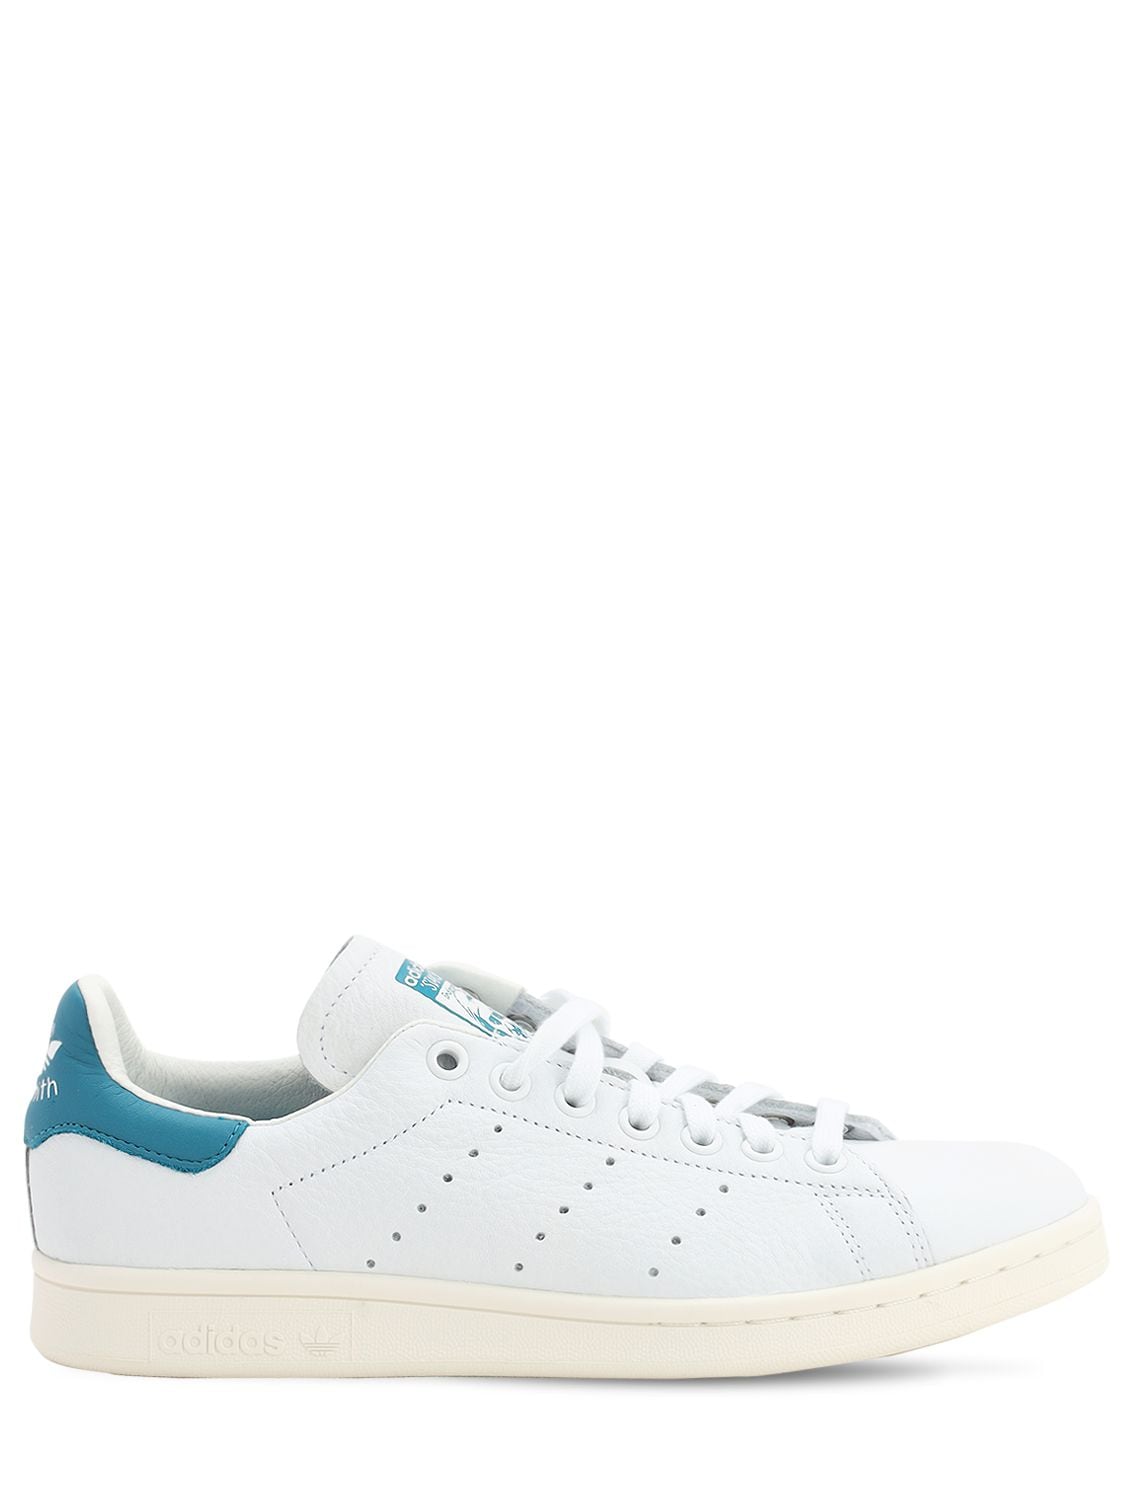 ADIDAS ORIGINALS STAN SMITH LEATHER trainers,70IWAN008-V0HJVEU1